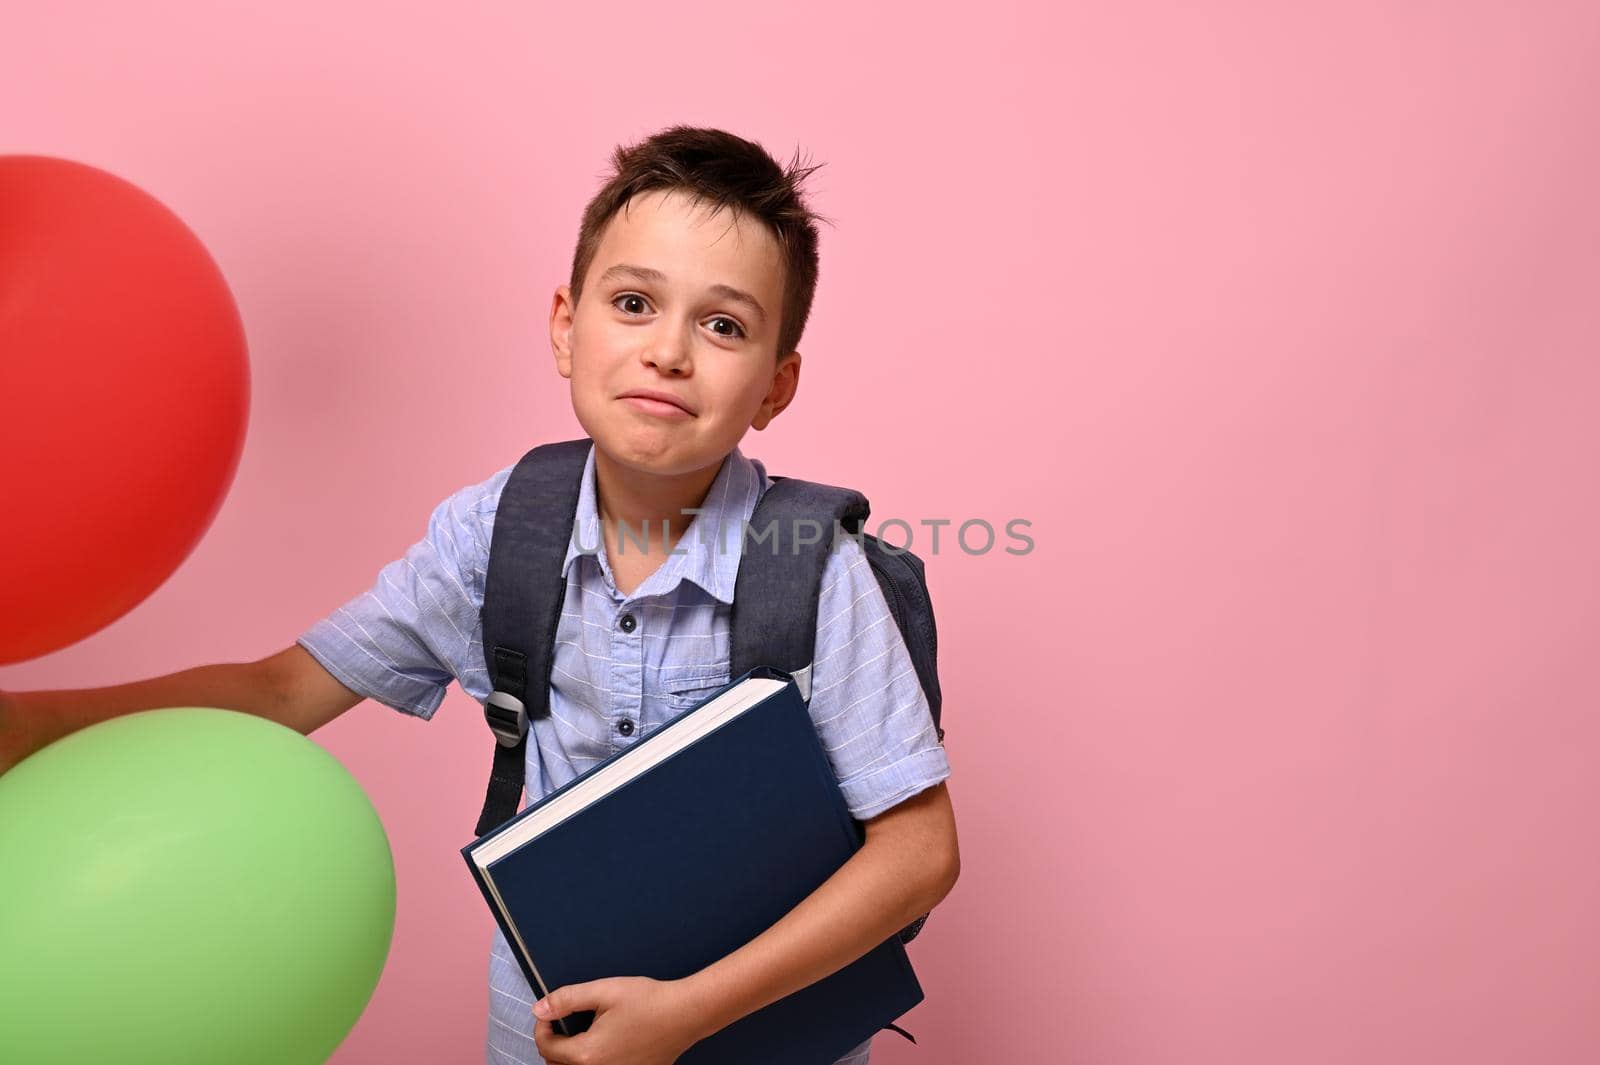 Schoolboy with backpack holding book and multicolored balloons, cute smiling posing to camera over pink background with copy space. Concepts of happy back to school.